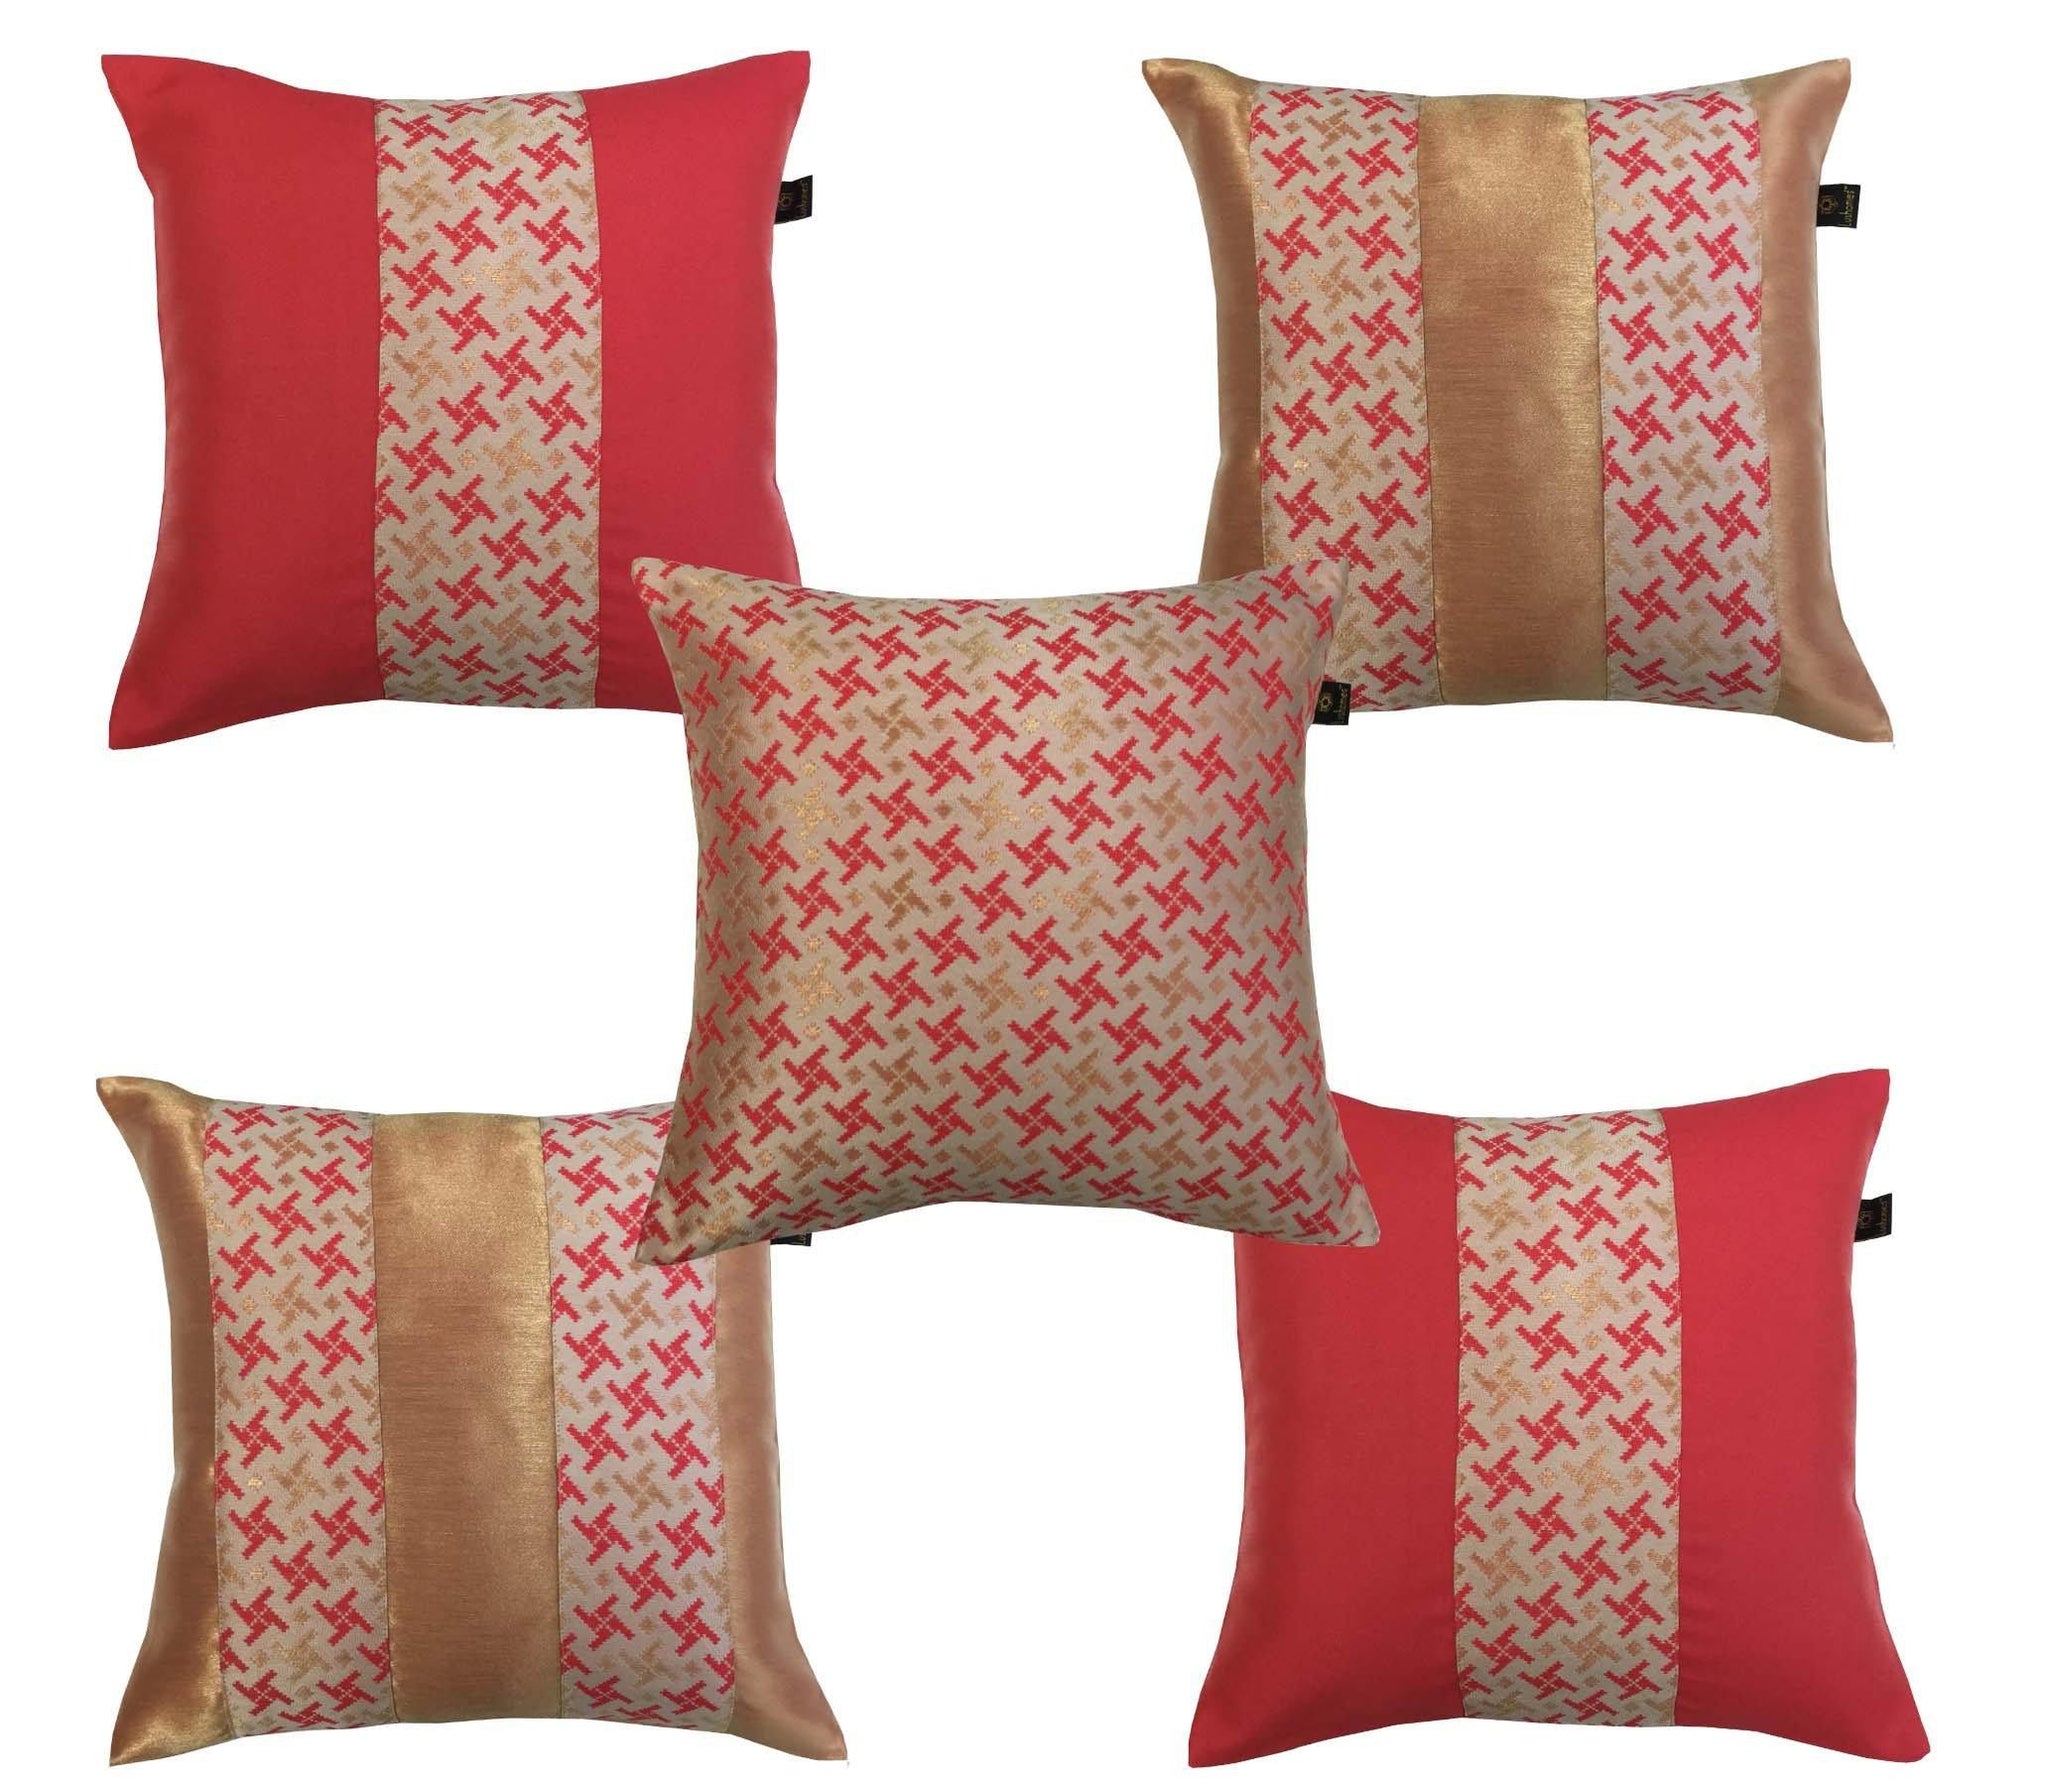 Lushomes Jacquard Hibiscus Design 2 Cushion Cover set for any celebration.(Pack of 5, 40 x 40 cms) - Lushomes